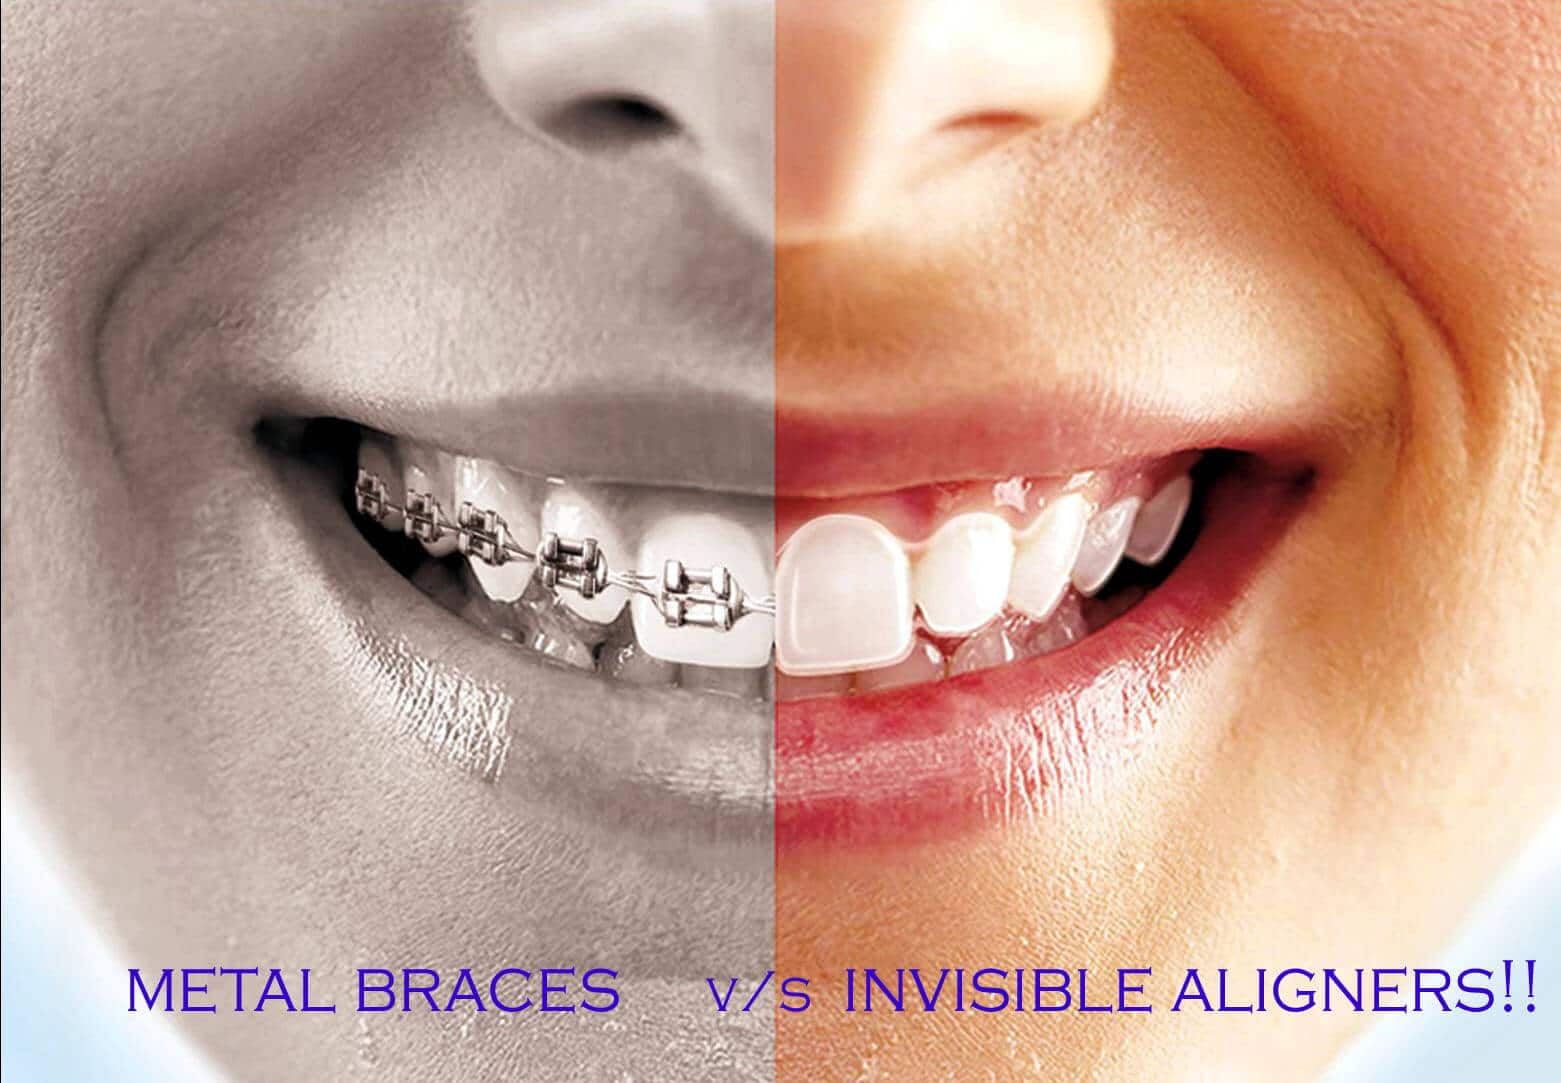 Metal Braces and Invisible Aligner comparison at Avance Dental